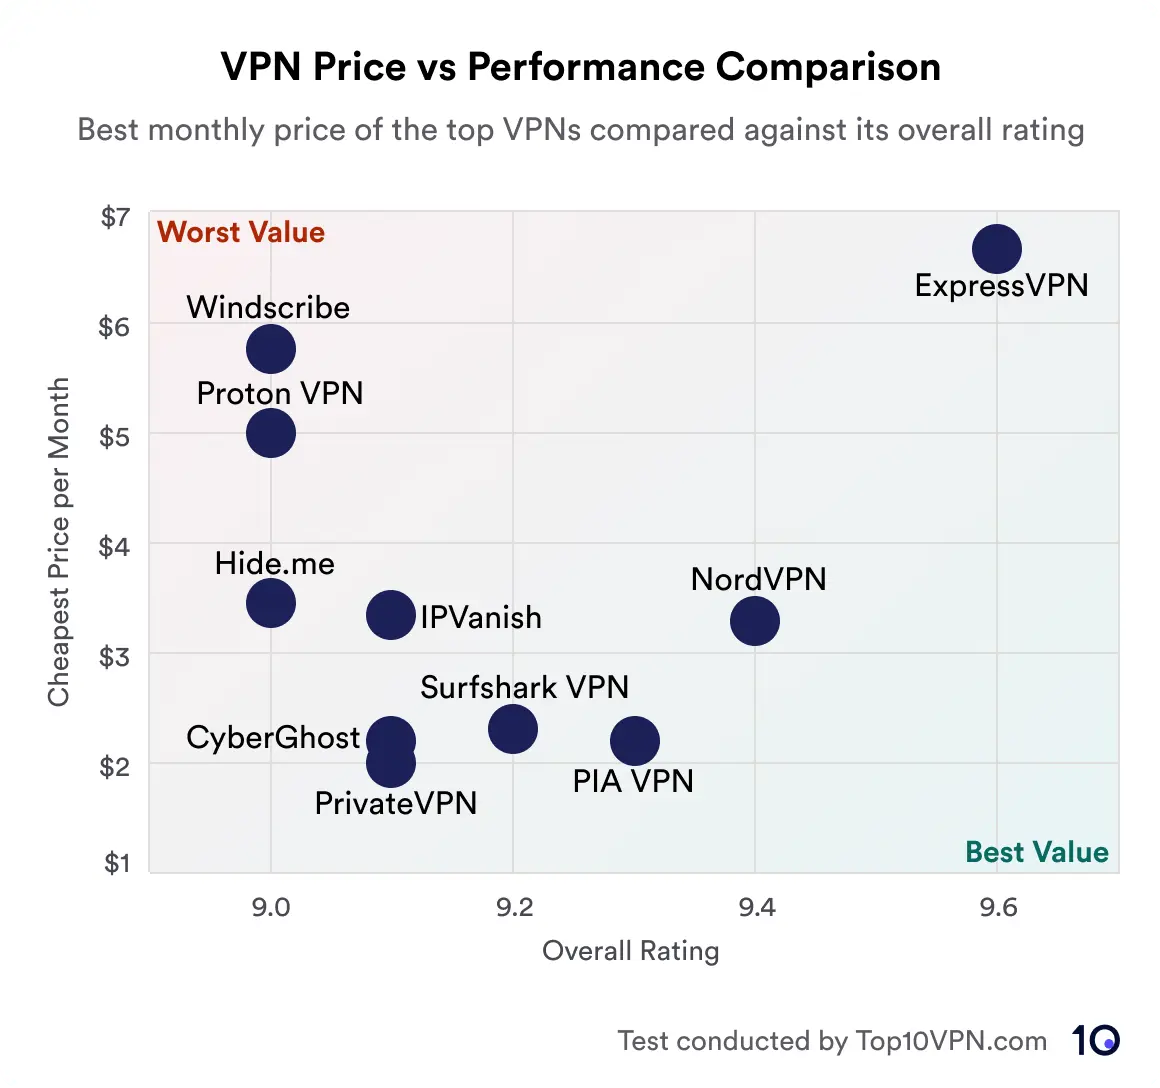 A scatter plot showing the cheapest monthly price and overall rating of various VPNs. These include ExpressVPN, NordVPN, PIA VPN, Surfshark VPN, PrivateVPN, IPVanish, CyberGhost, Hide.me, Proton VPN and Windscribe. NordVPN offers the best value (3.29 dollars) for money as well a high overall rating of 9.4 out of 10. ExpressVPN has the highest overall rating at 9.6, however it comes at a monthly cost of 6.67 dollars